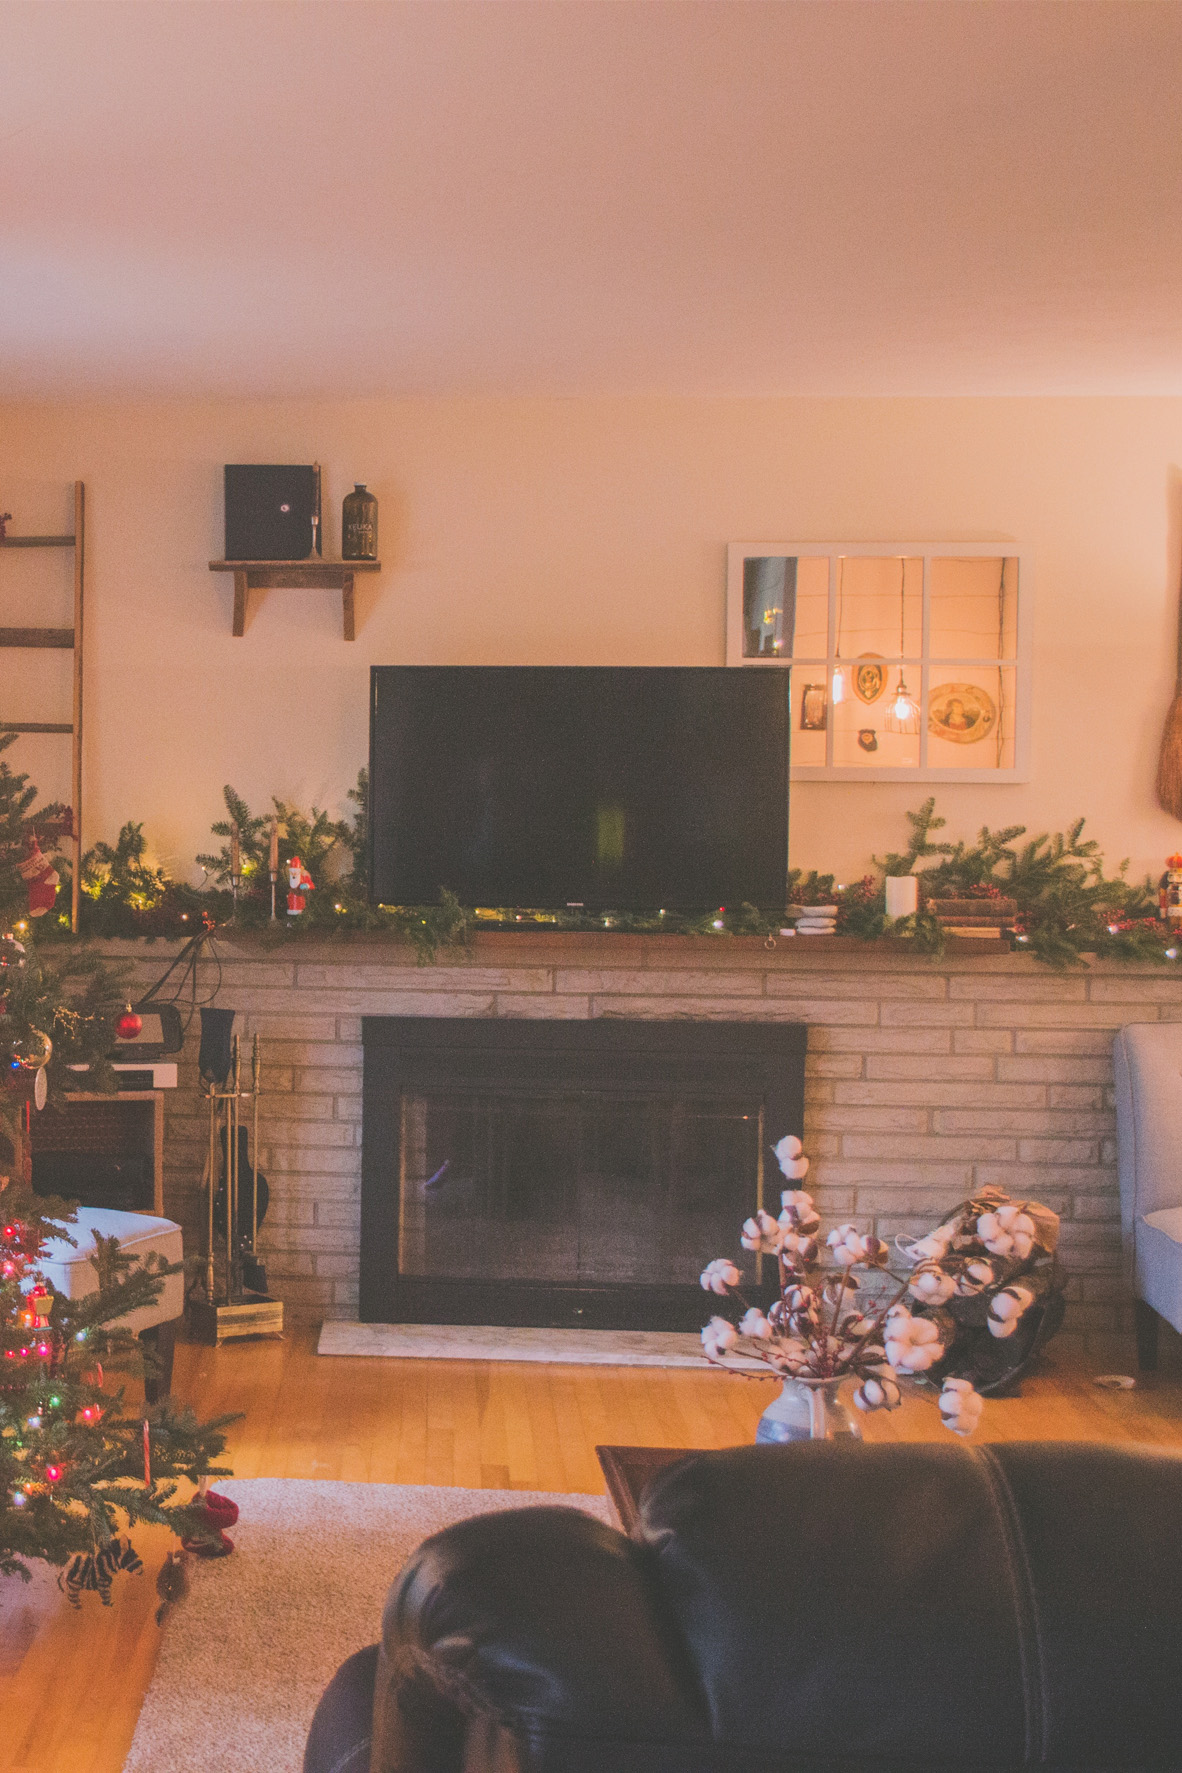 Why wreaths and garlands are a strong choice for Christmas decor